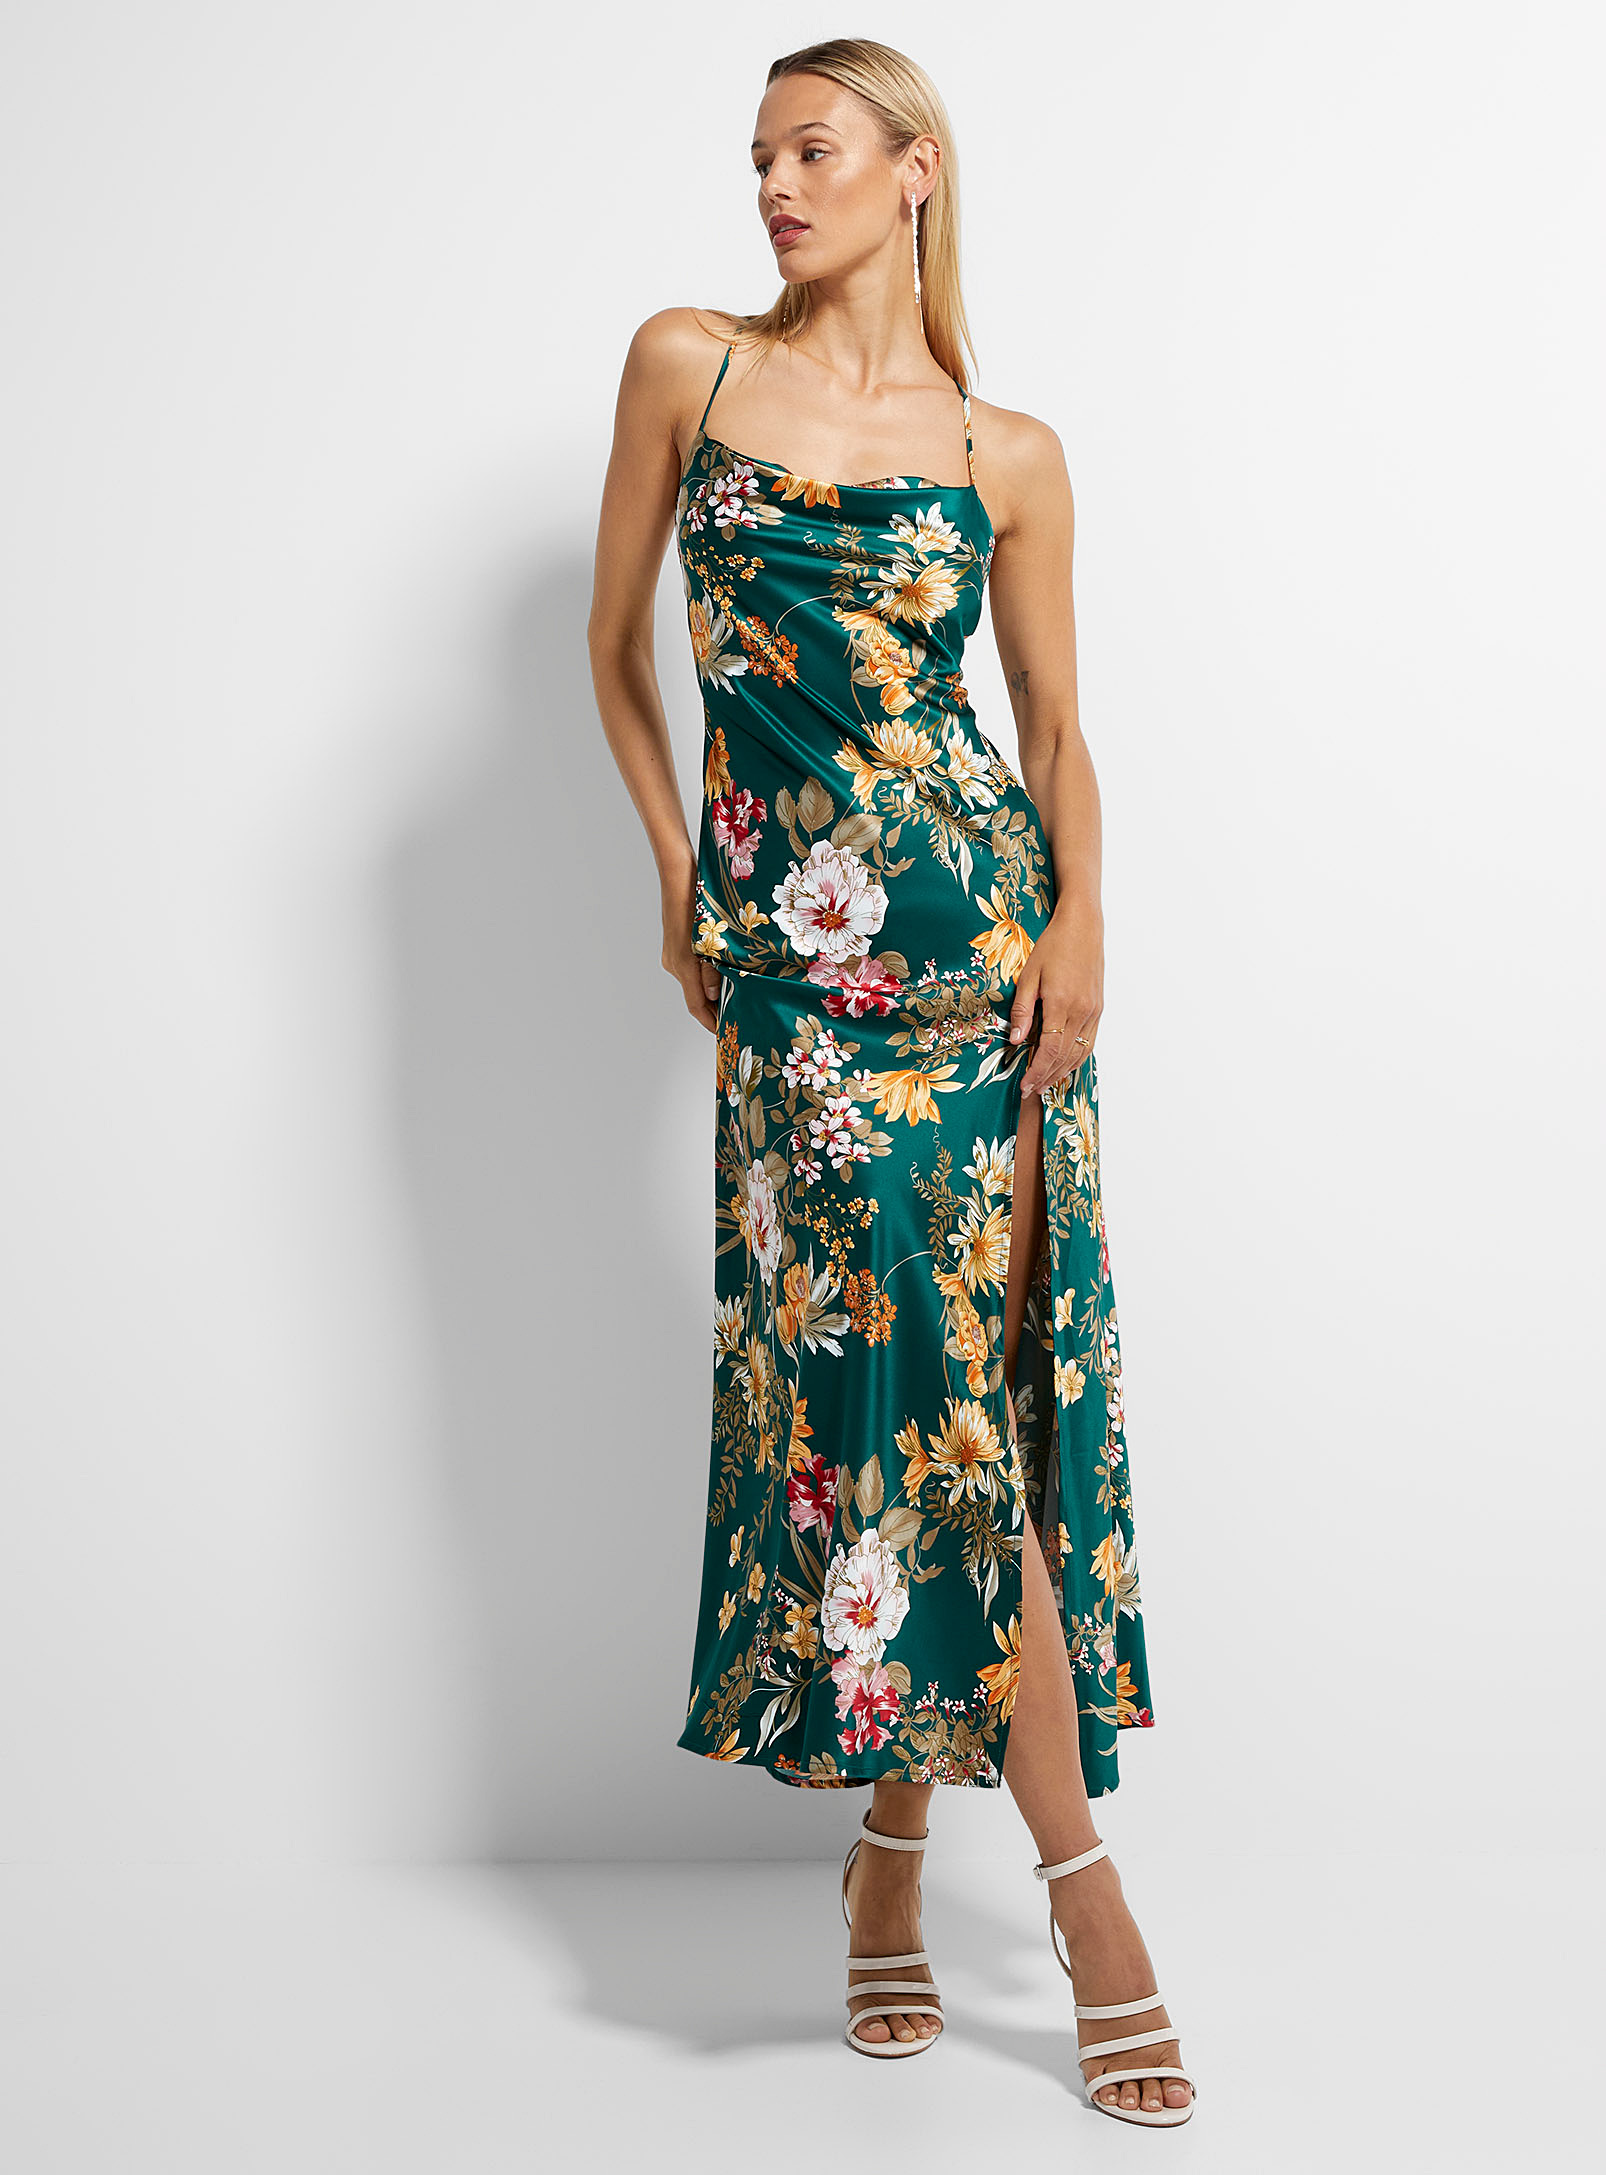 Icone Stunning Flowers Long Satiny Dress In Teal